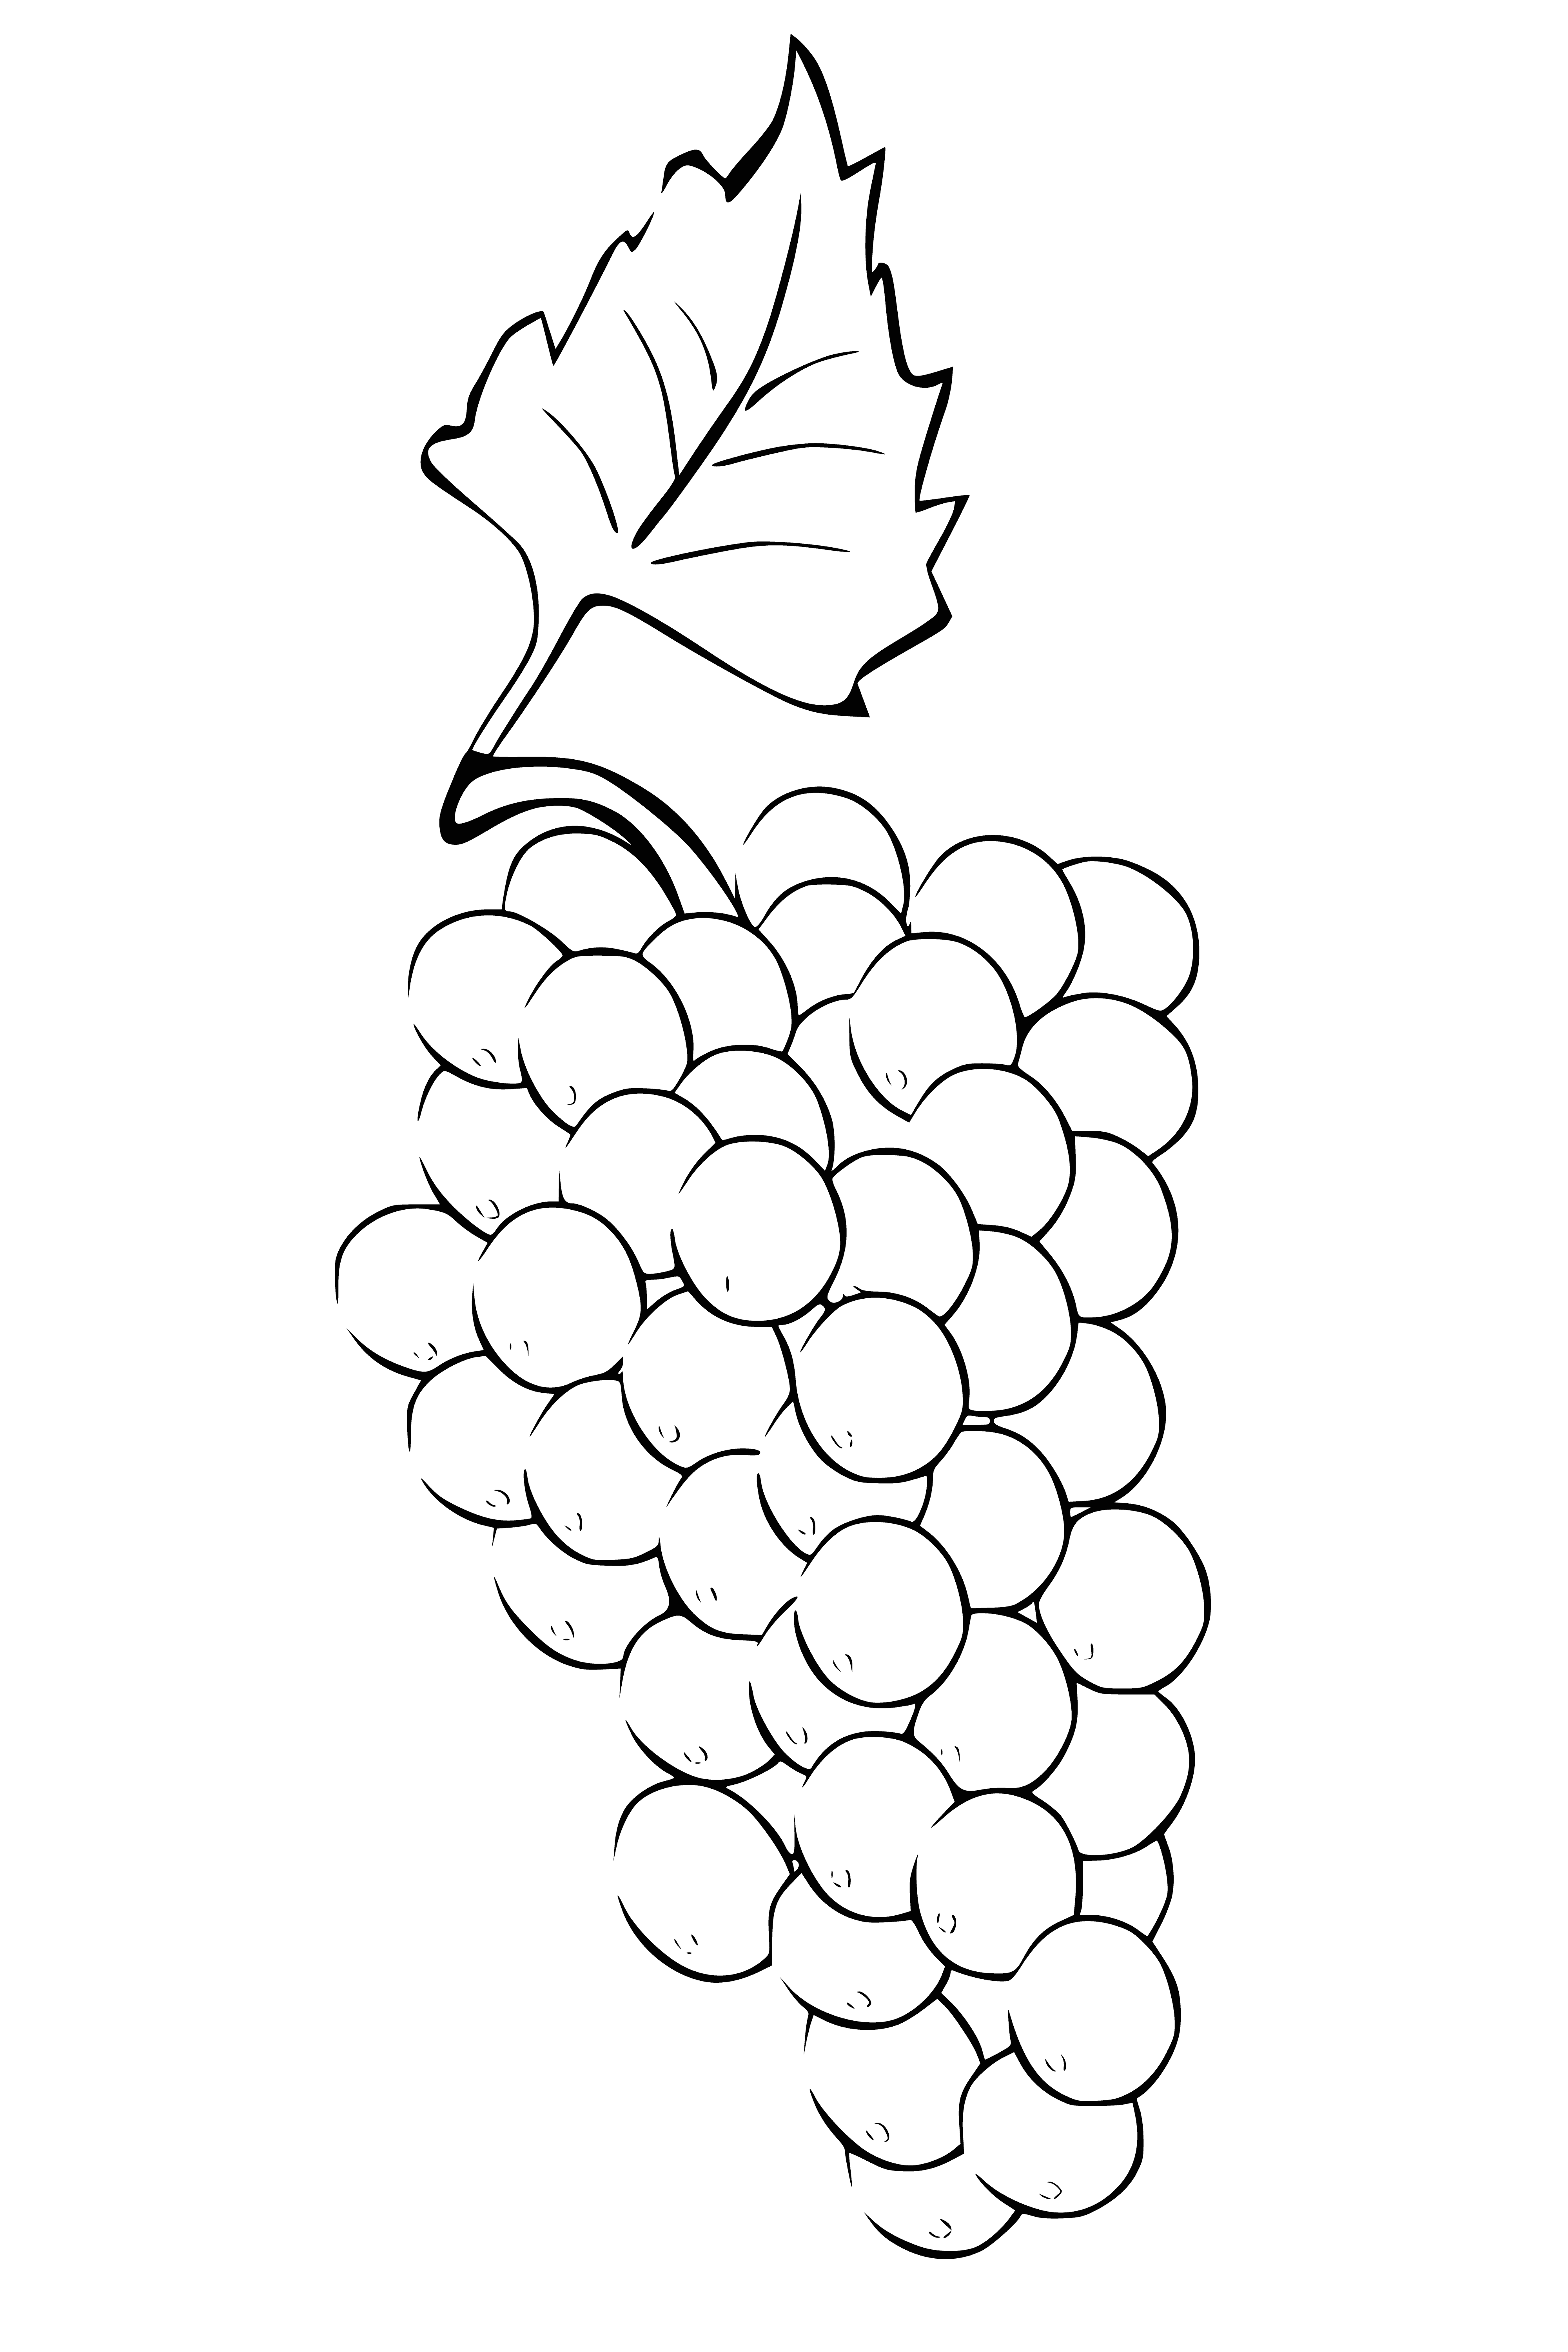 coloring page: Cluster of green grapes on thin stem, round & glossy, attached to long green vine.